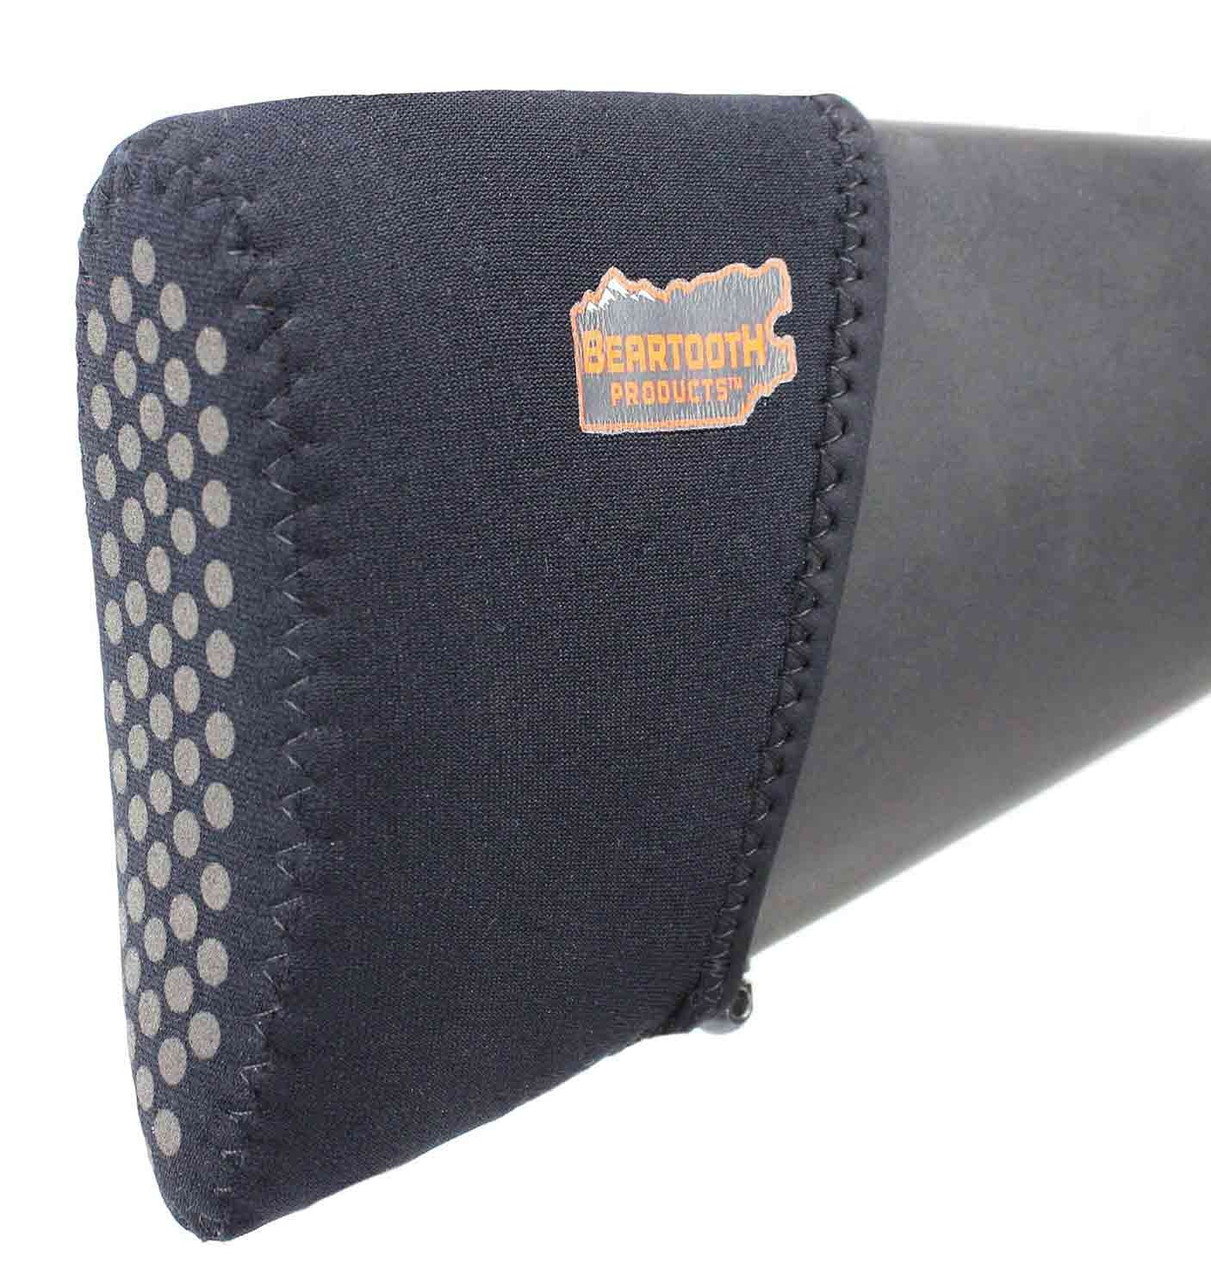 Beartooth’s Recoil Pad Kit 2.0 is by far the best way to eliminate hard-hitting recoil and properly fit your gun. The stretchy slip-on neoprene sleeve fits nearly all gunstock sizes and works excellent with both shotguns and rifles. Simply insert foam into sleeve and pull on – no more gunsmithing. Rubber backing keeps the hi-density inserts in place – which are constructed of closed cell foam, known for its exceptional high energy absorption properties. The various insert sizes can be used interchangeably to precisely achieve your desired cushioning level. Offers a superior fit and feel versus rubber slip-ons. Also great for gun fit, easily adjust length-of-pull. Another key feature in the improved 2.0 version is the angled opening, which allows for convenient swivel stud access. By reducing recoil, Beartooth’s RPK can assist in eliminating shoulder fatigue while improving your shooting accuracy. Shot after shot, the Recoil Pad Kit gets it done.